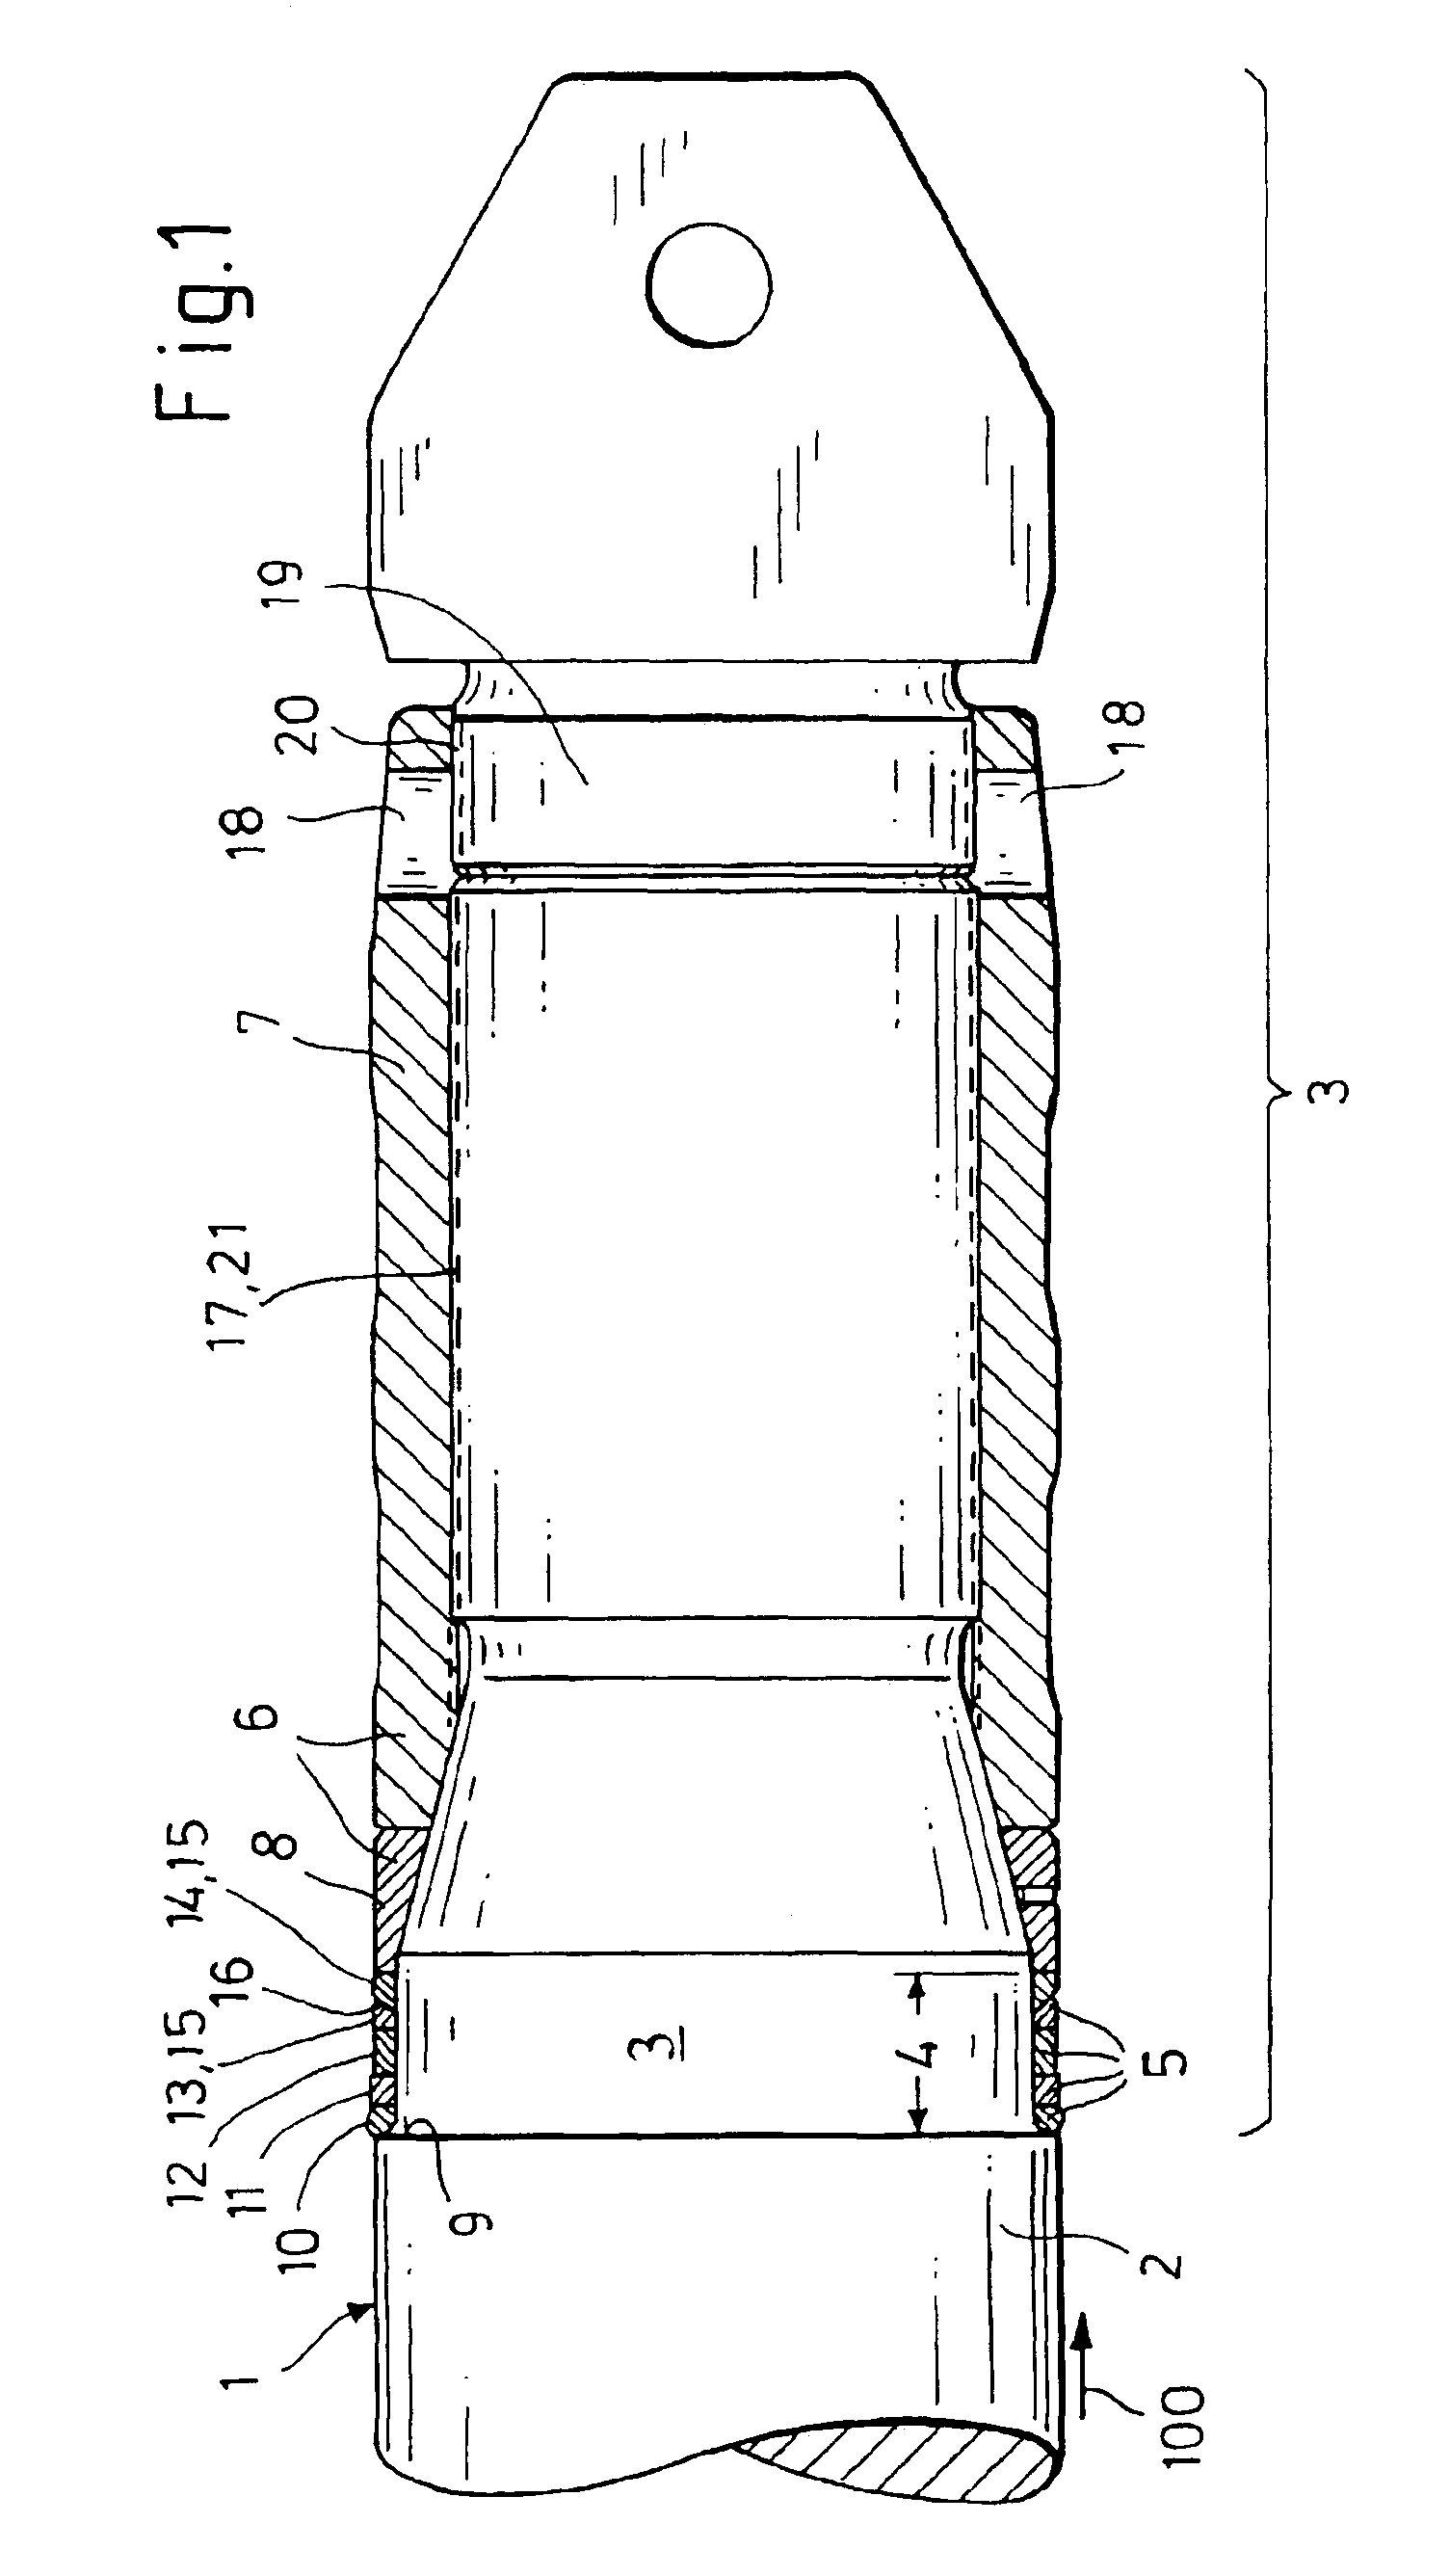 Apparatus for the section-wise autofrettage of gun barrels